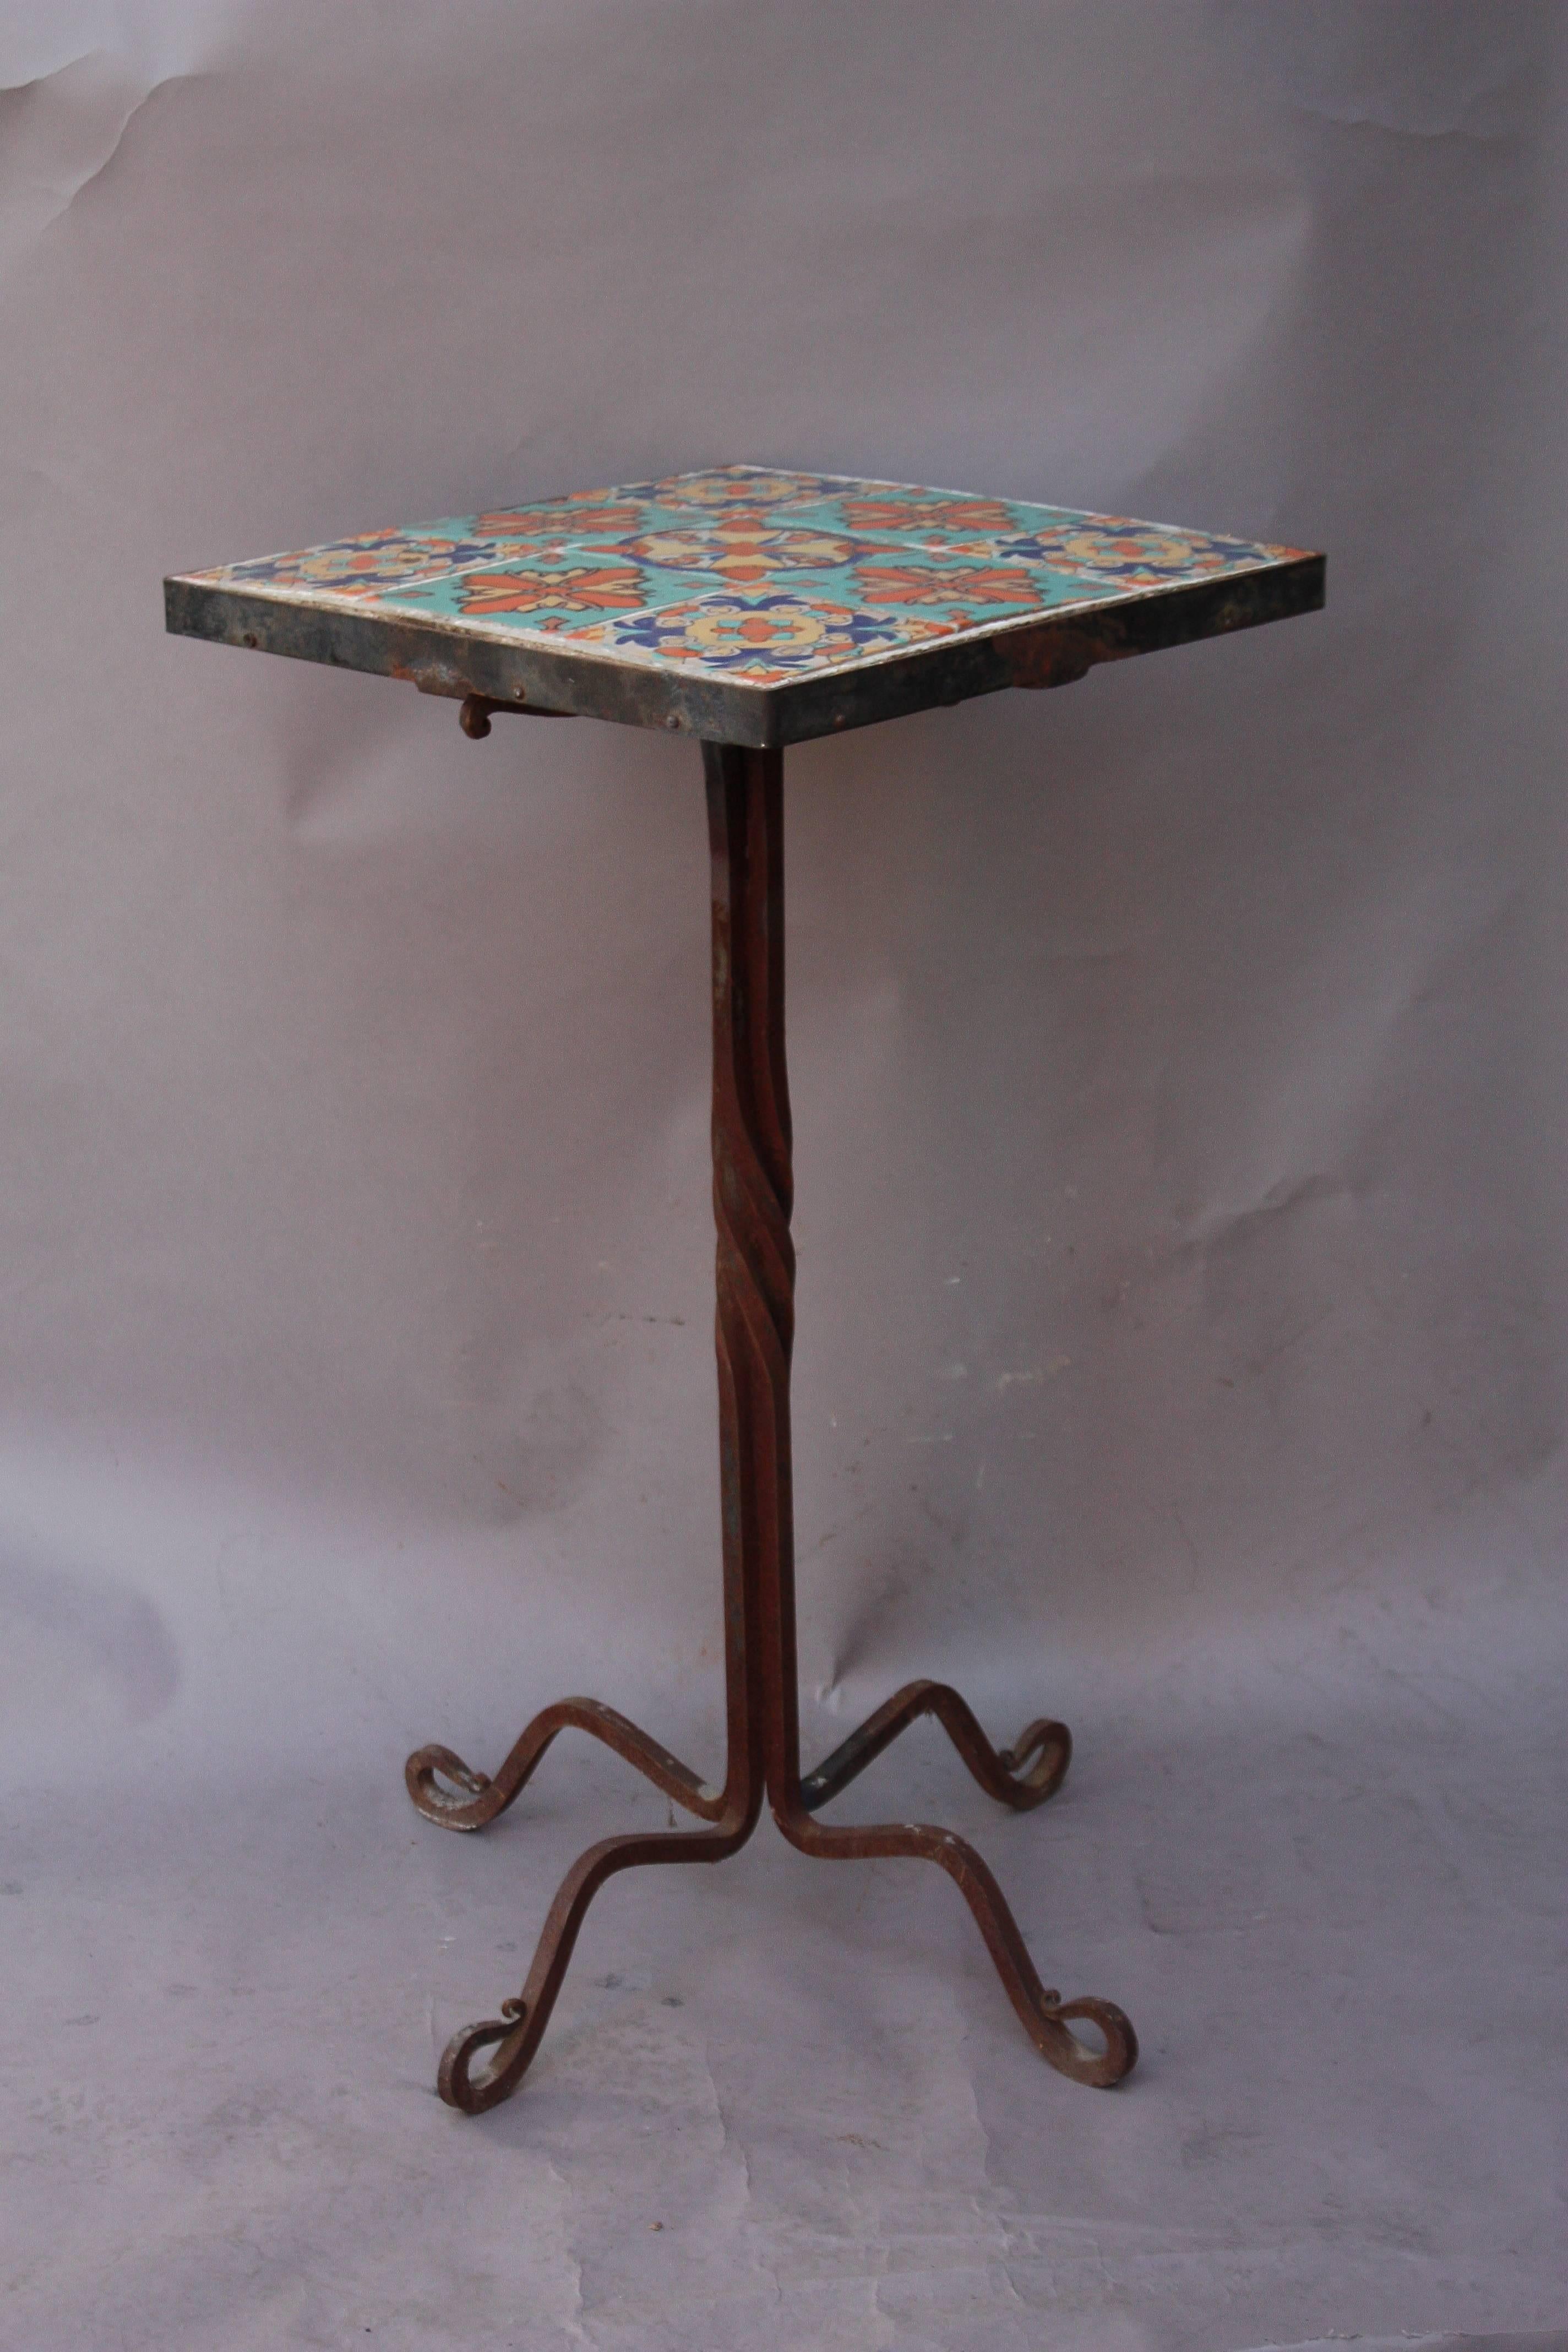 Ceramic 1920s Tall Iron and Tile Side Table